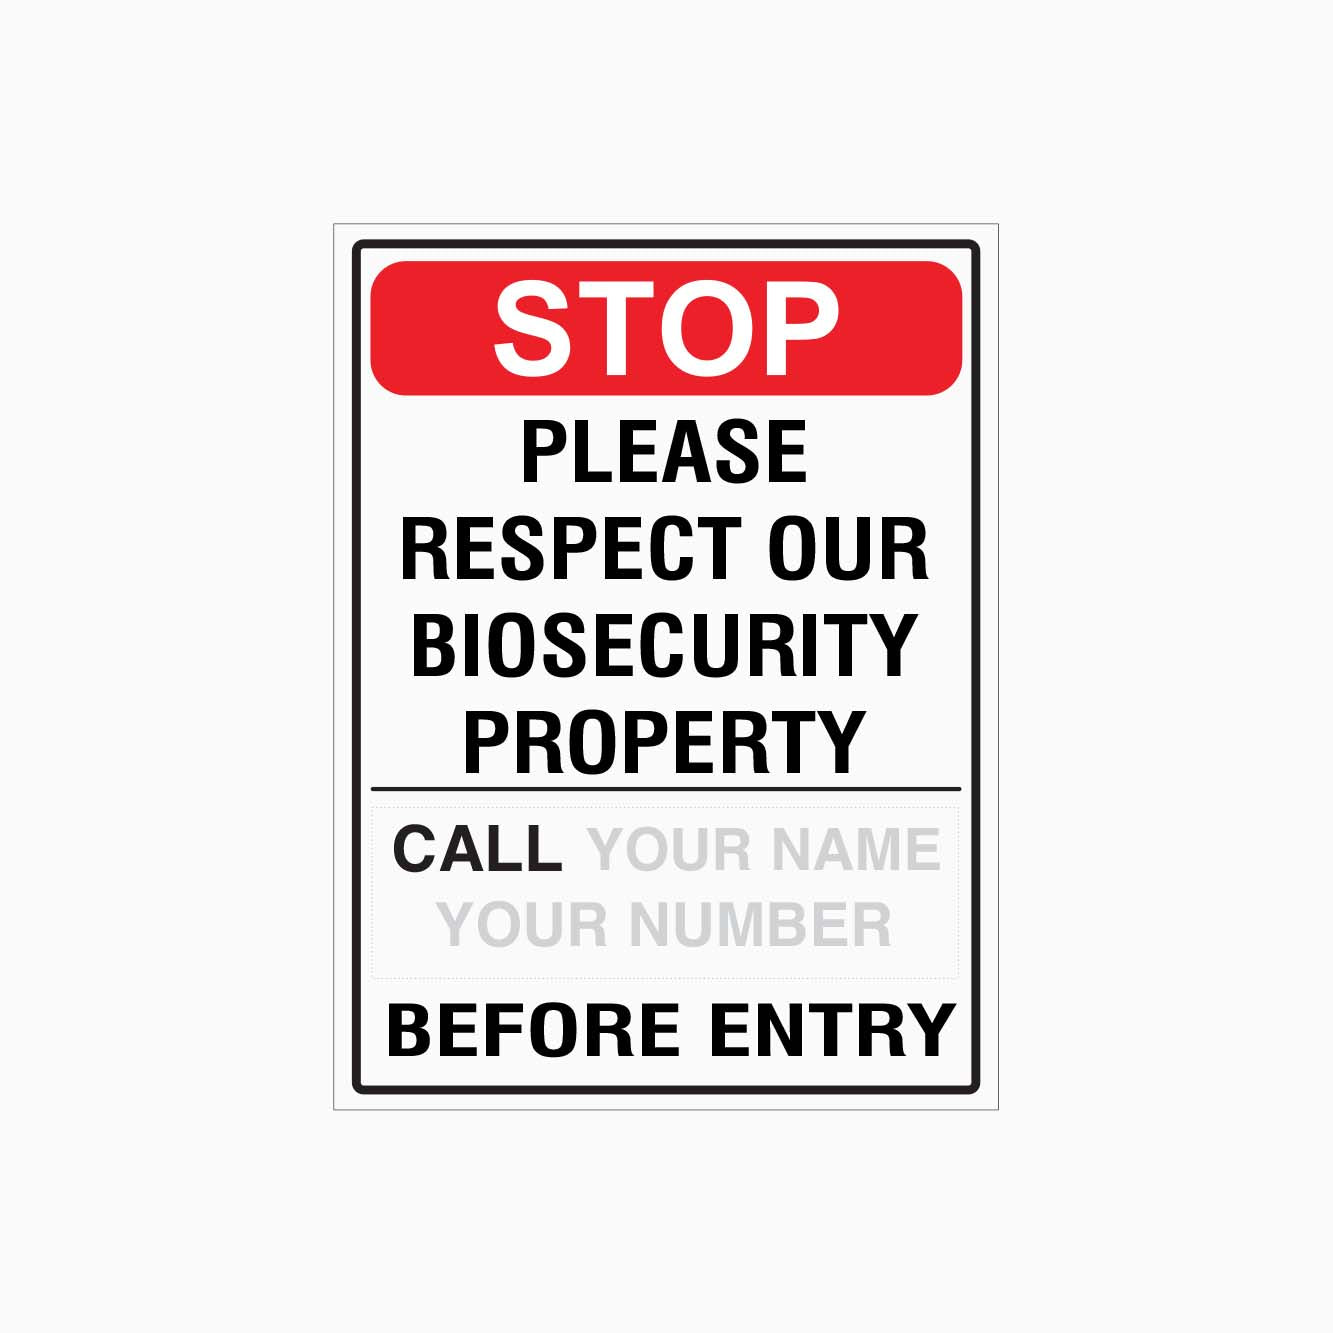 STOP PLEAES RESPECT OUR BIOSECURITY PROPERTY SIGN CALL BEFORE NETRY SIGN WITH CUTOM NAME AND NUMBER SIGN - GET SIGNS